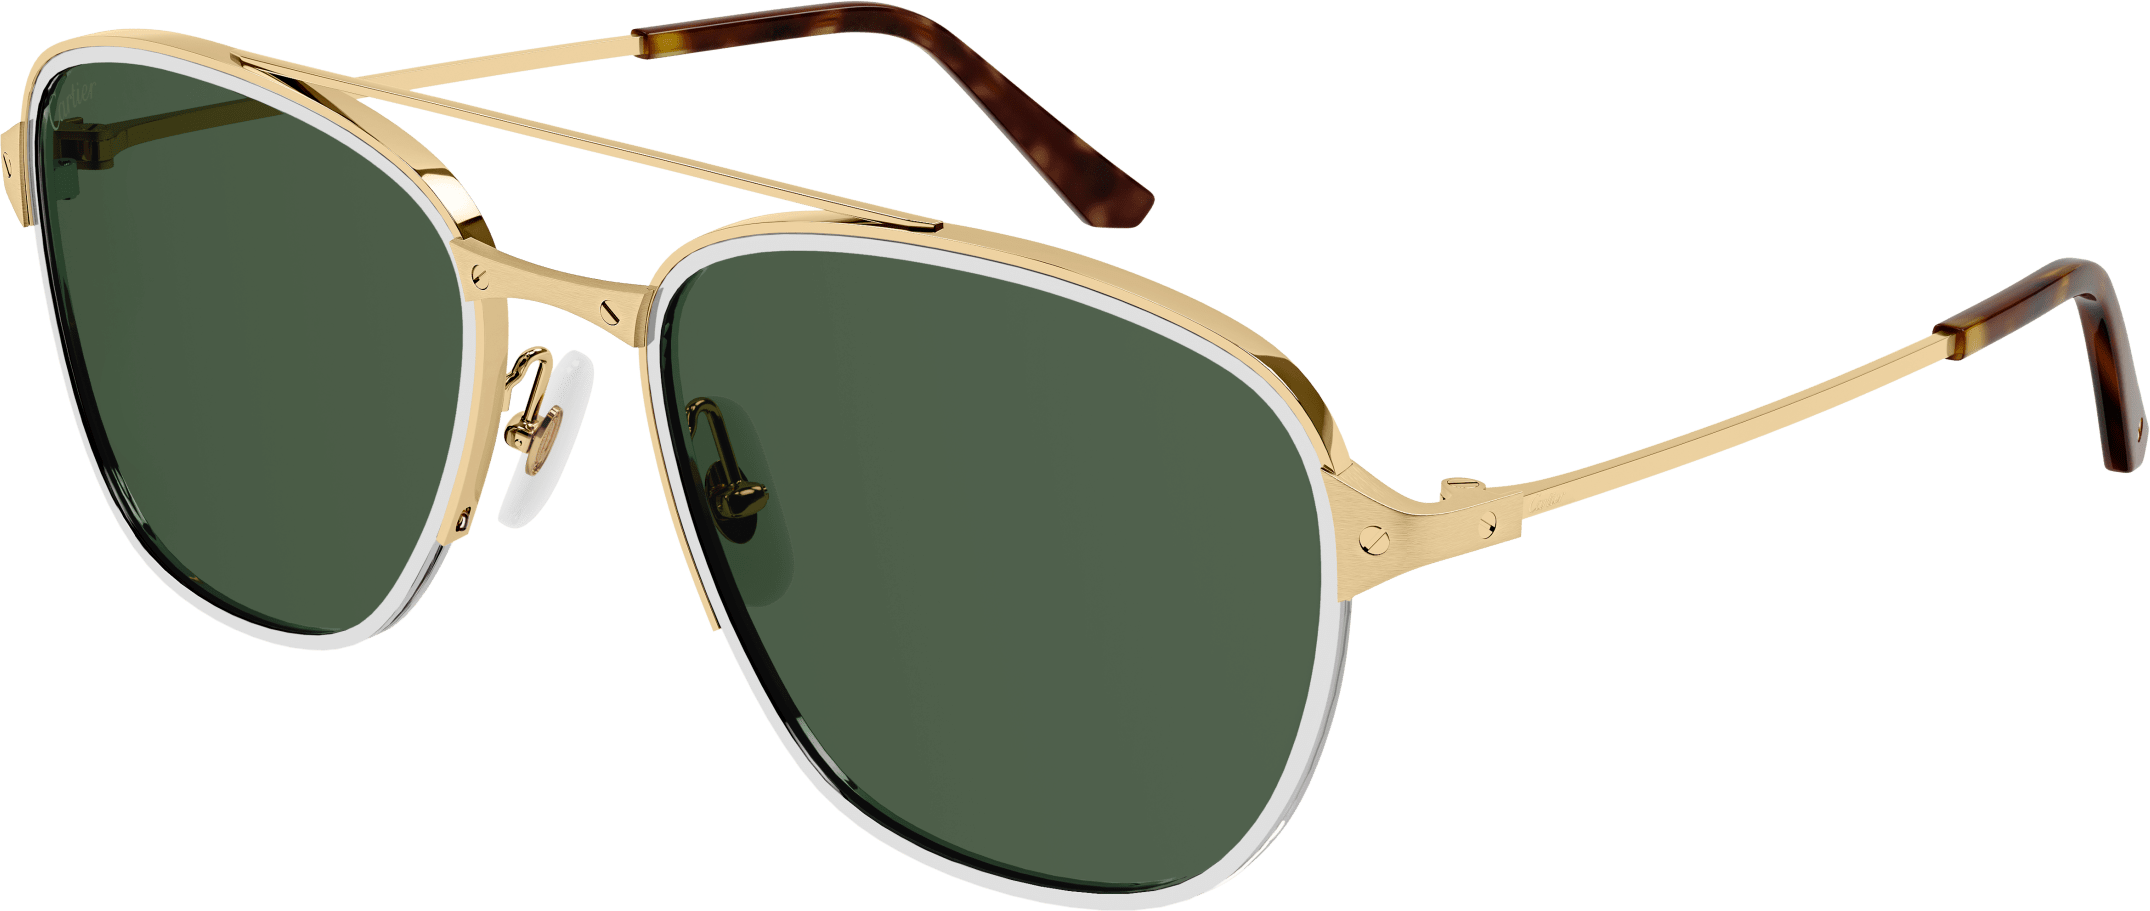 Color_CT0326S-002 - GOLD - GREEN - AR (ANTI REFLECTIVE) - POLARIZED